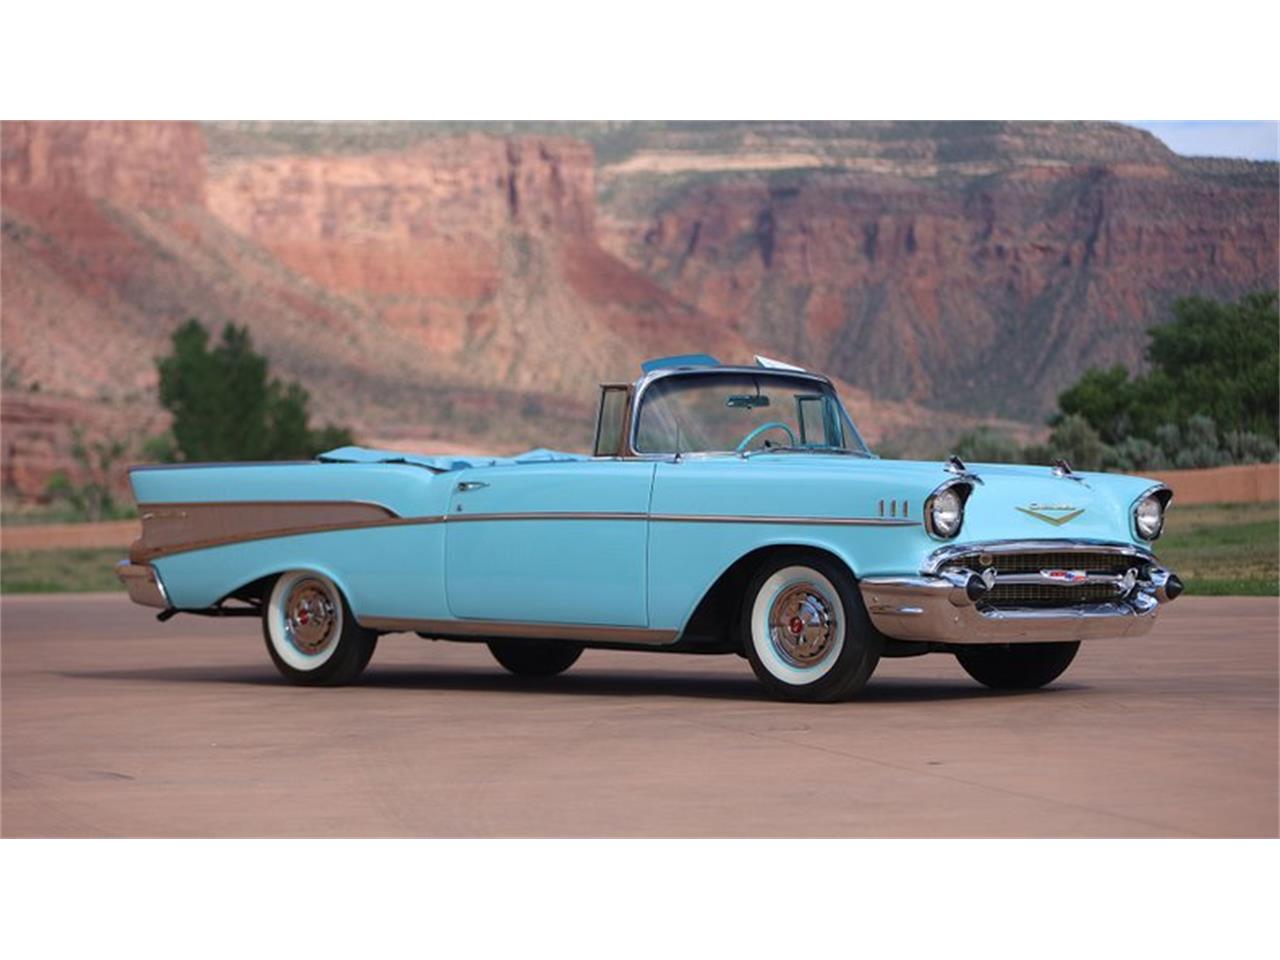 For Sale at Auction: 1957 Chevrolet Bel Air in Monterey, California for sale in Monterey, CA